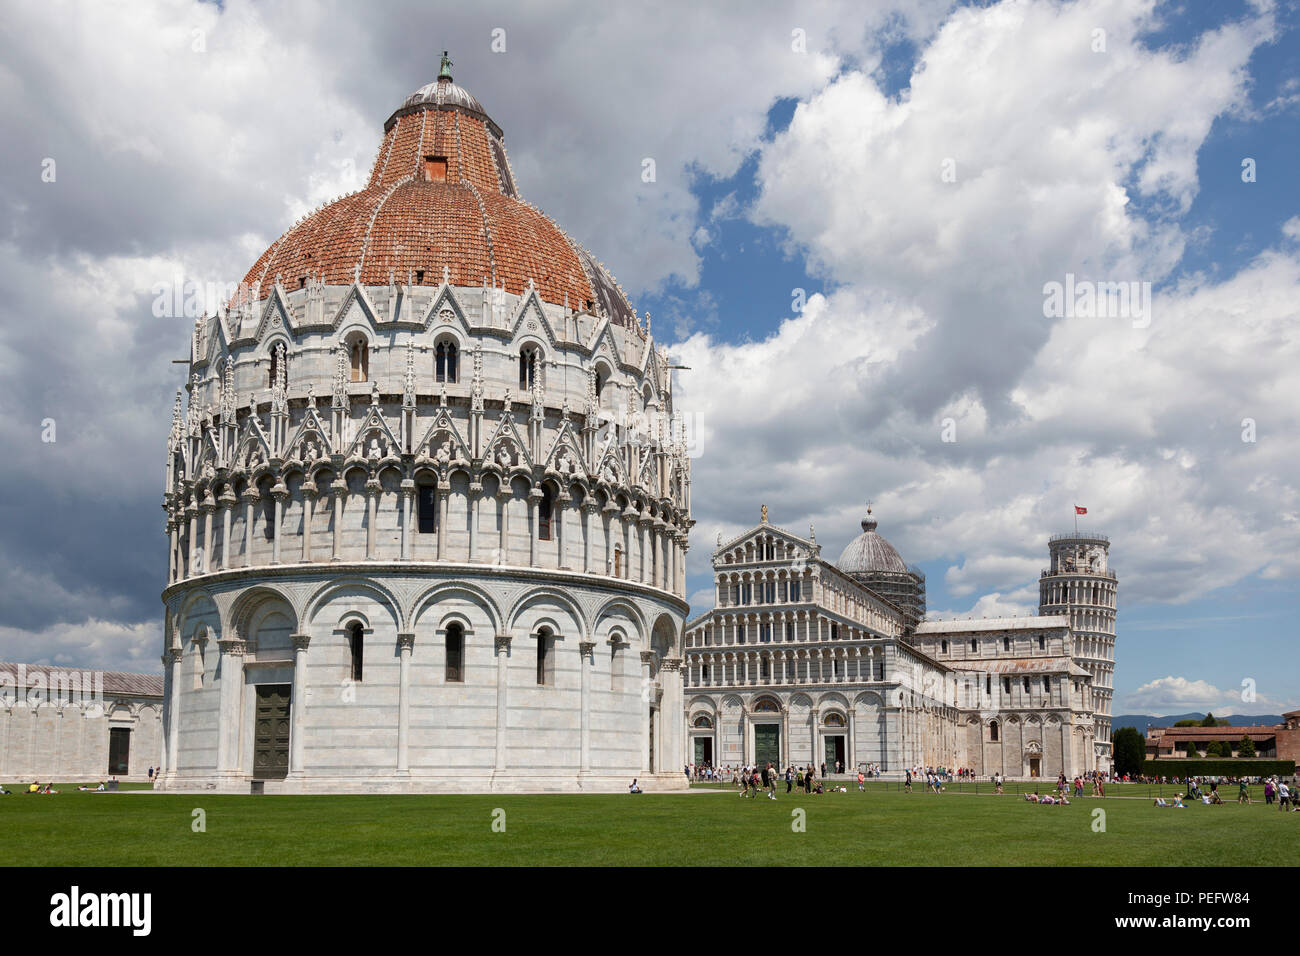 On the 'Field of Miracles' at Pisa (Tuscany - Italy), the Baptistry (under renovation at the time of the shot), the cathedral and the campanile. Stock Photo